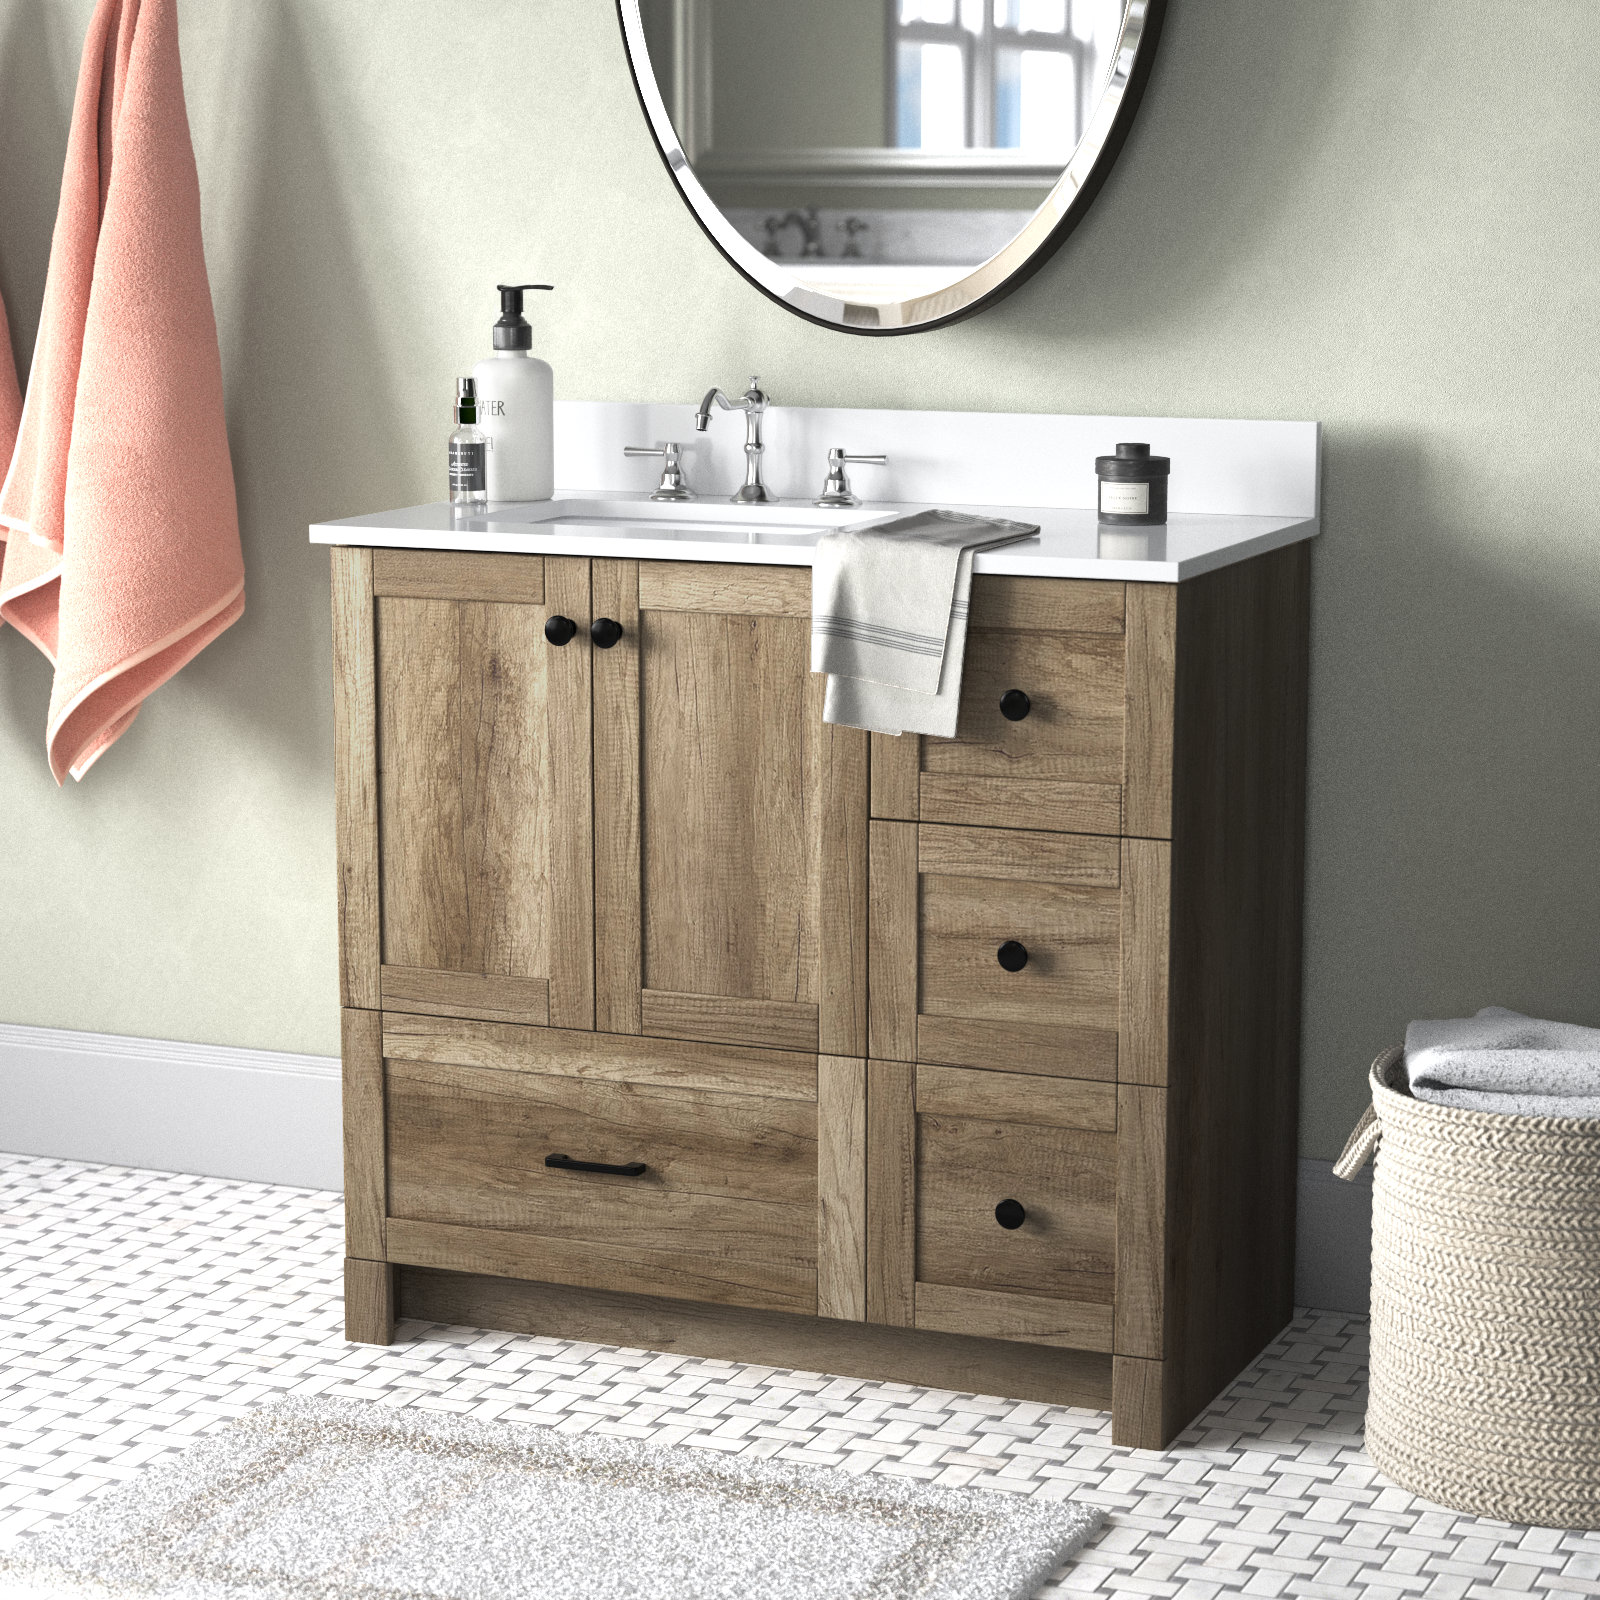 Wonline 18 inch Bathroom Vanity for Small Space Cabinet Farmhouse